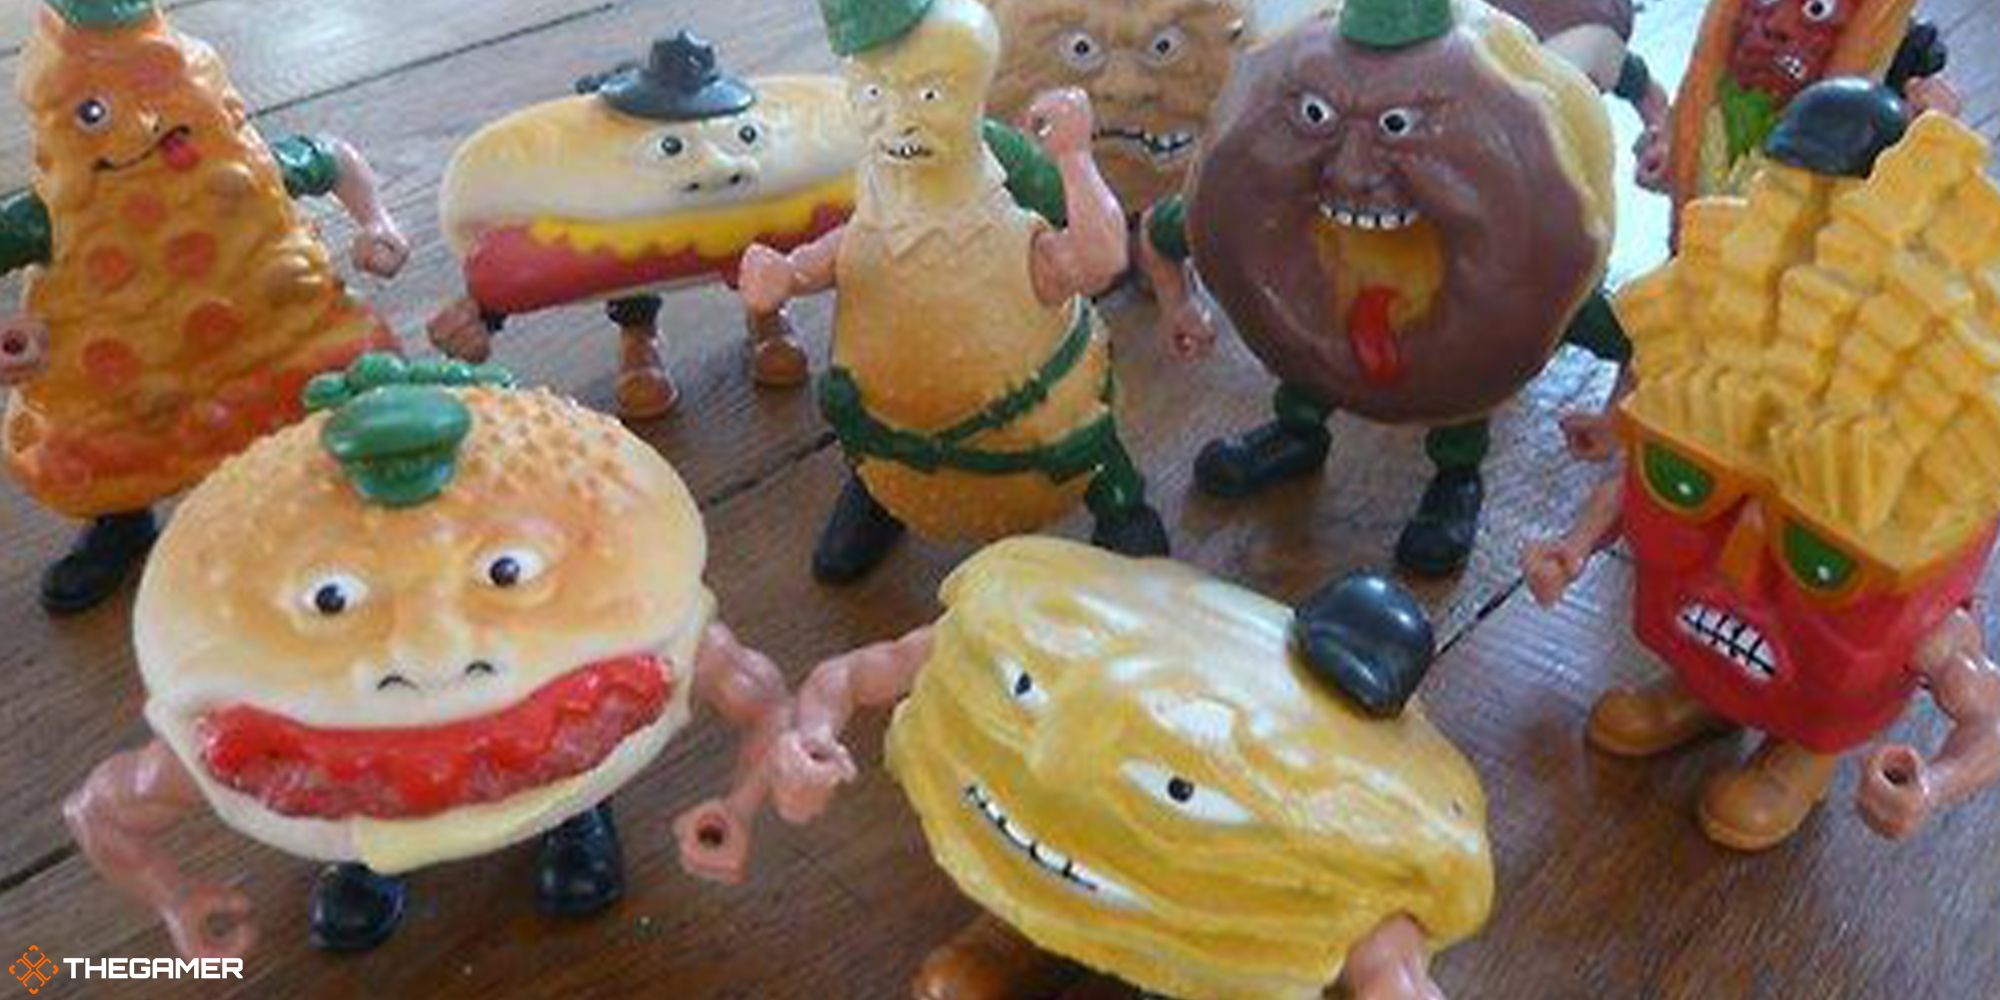 Food Fighter toys